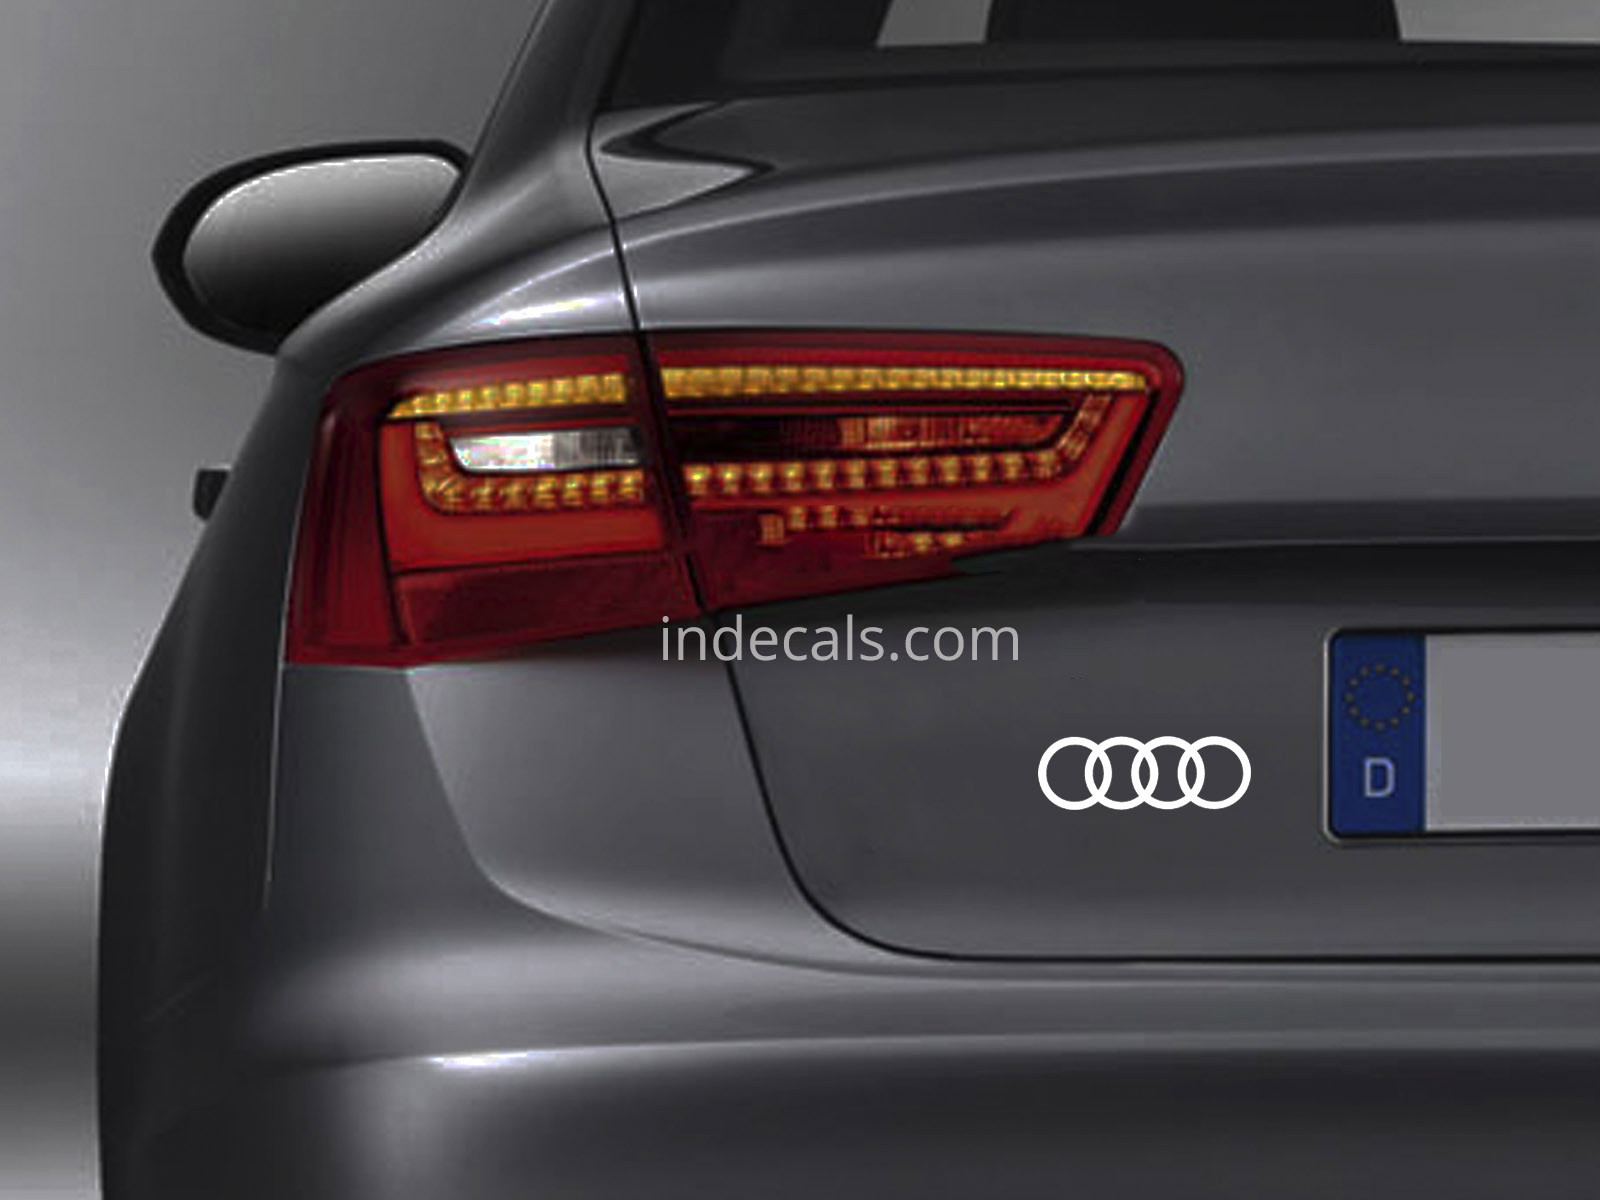 3 x Audi Rings Stickers for Trunk - White